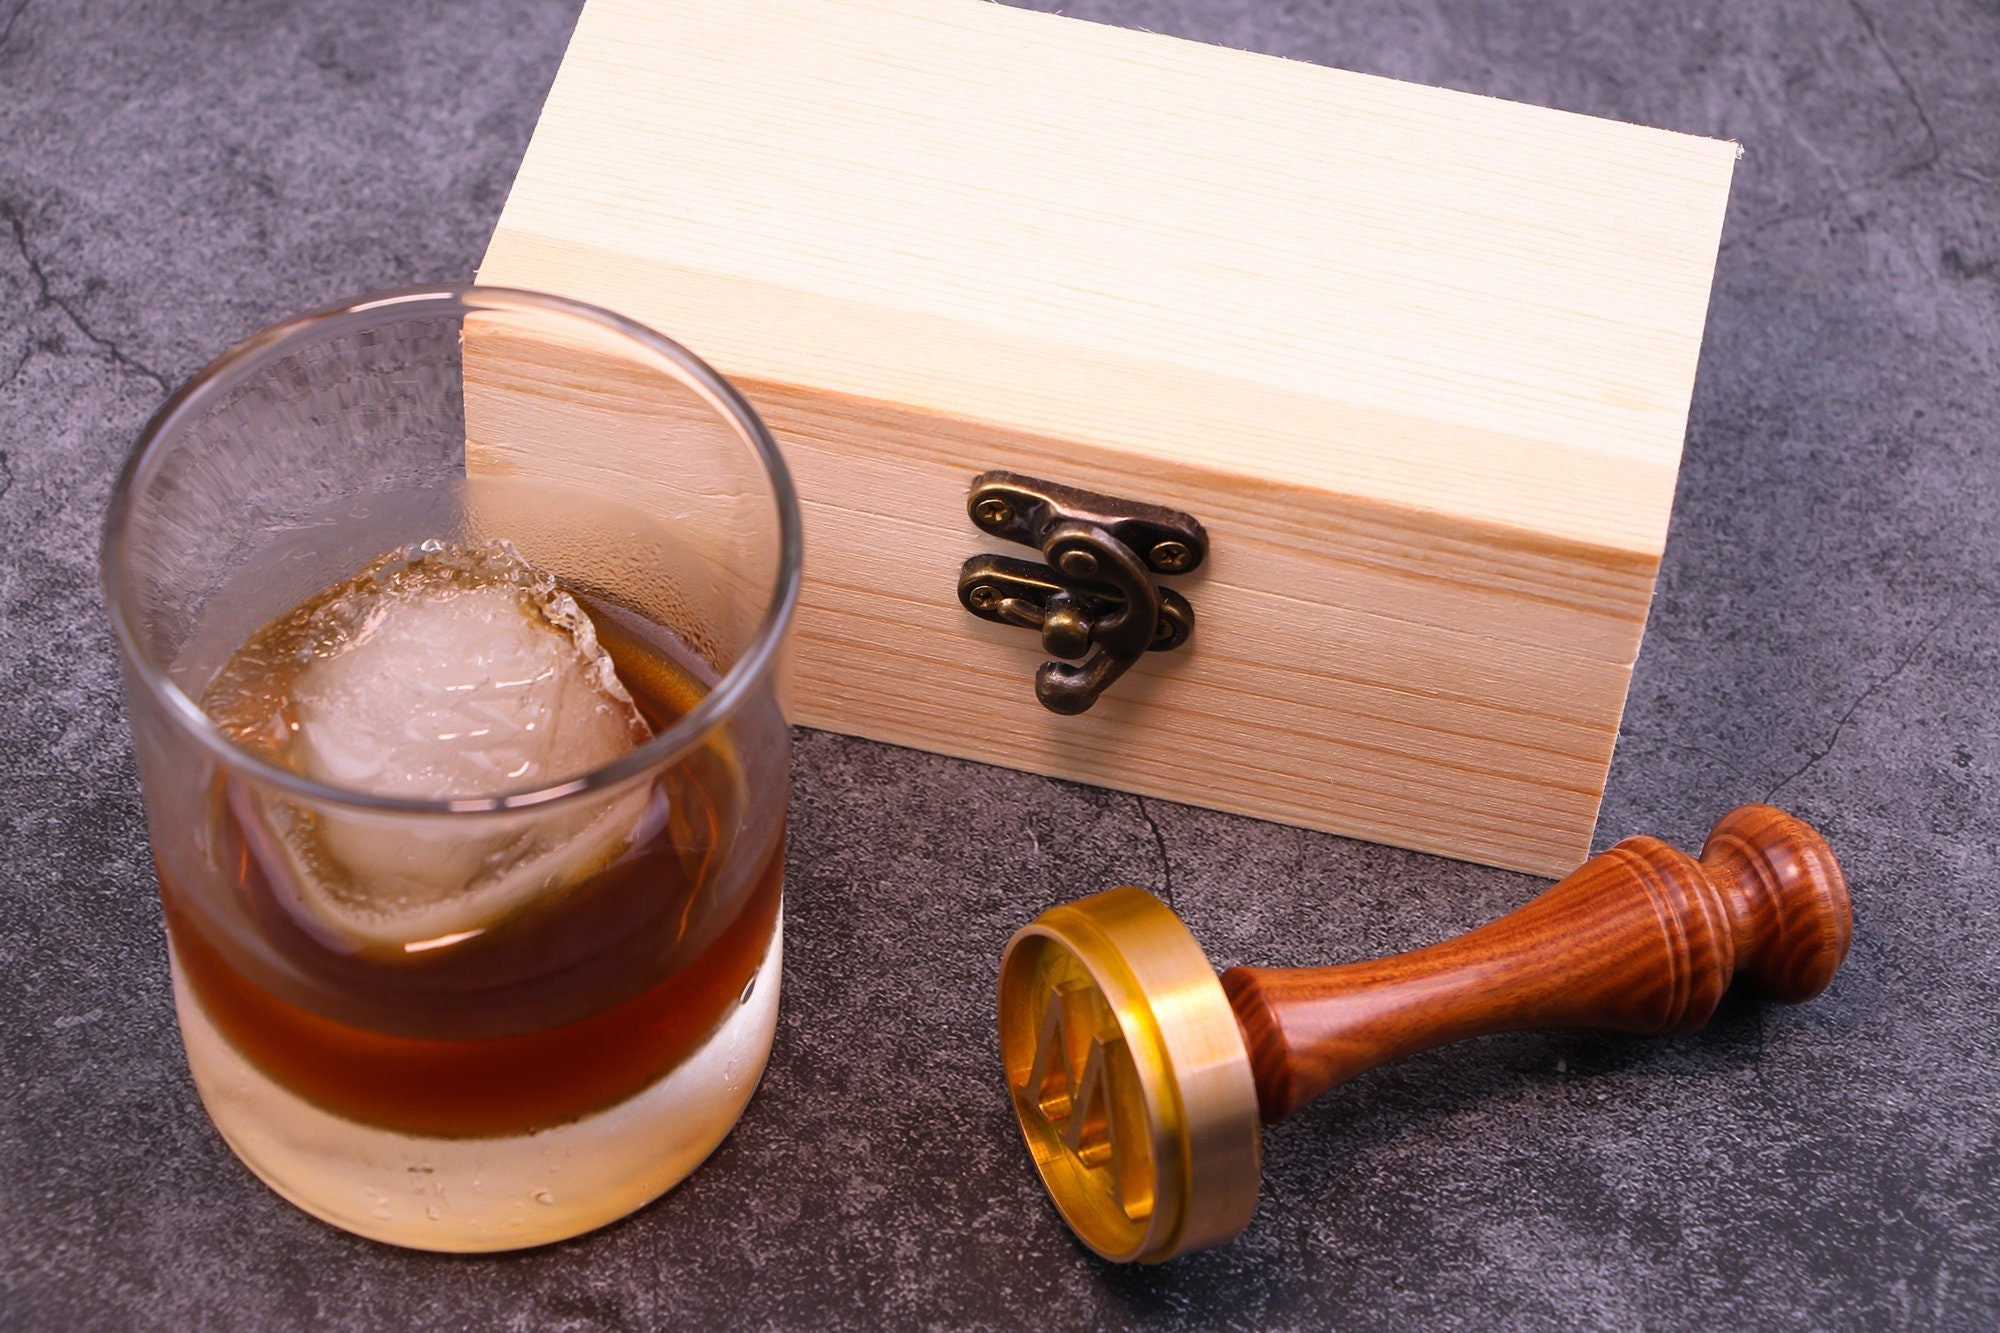 Ice Cube Embossing Imprinting Tray – The Whiskey Ball